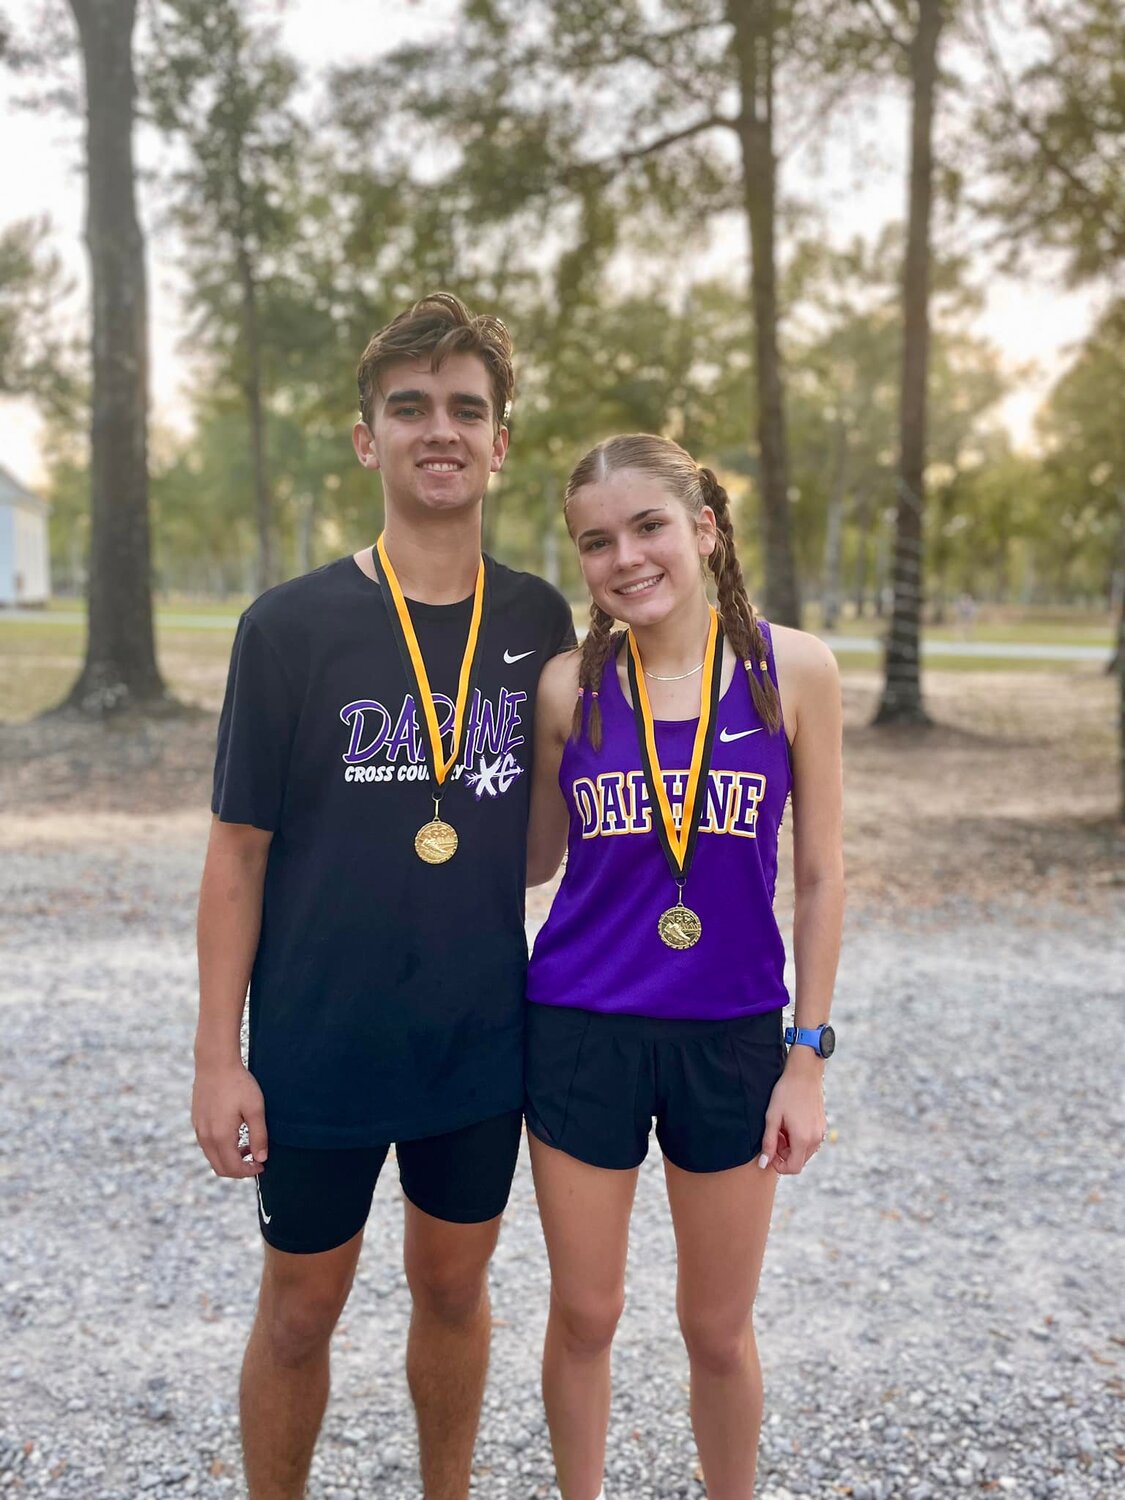 Daphne junior Sam Sternberg and senior Sophie West earned All-County distinction with top-15 finishes in their respective races at Bicentennial Park on Thursday, Oct. 19, during the Baldwin County Championships. Sternberg finished 9th overall and West crossed the finish line in 14th place.